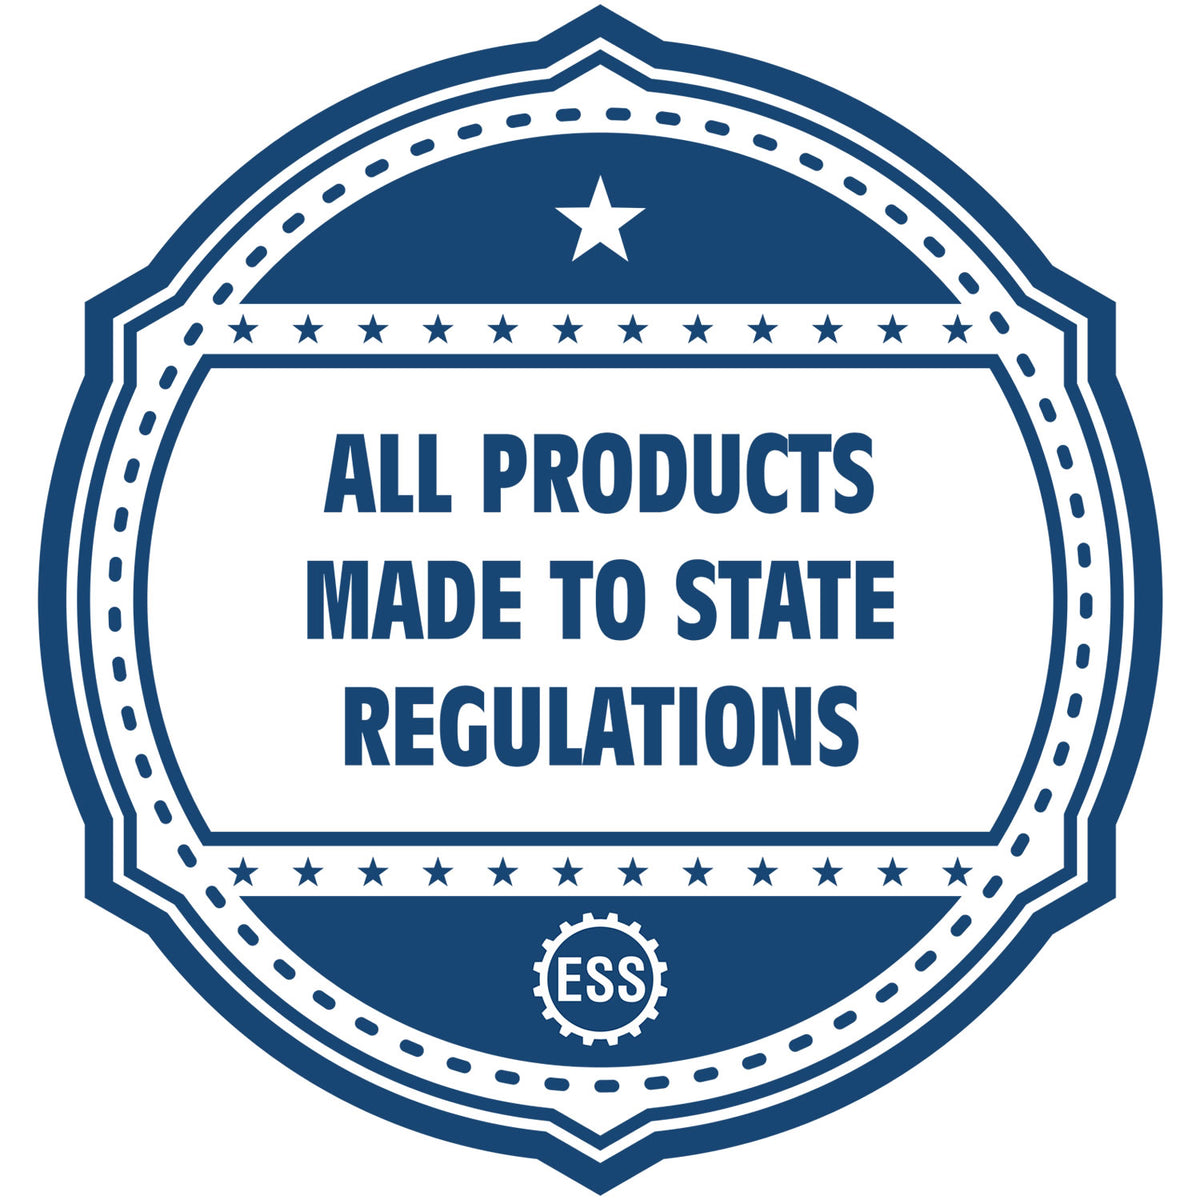 An icon or badge element for the Wooden Handle New Hampshire State Seal Notary Public Stamp showing that this product is made in compliance with state regulations.